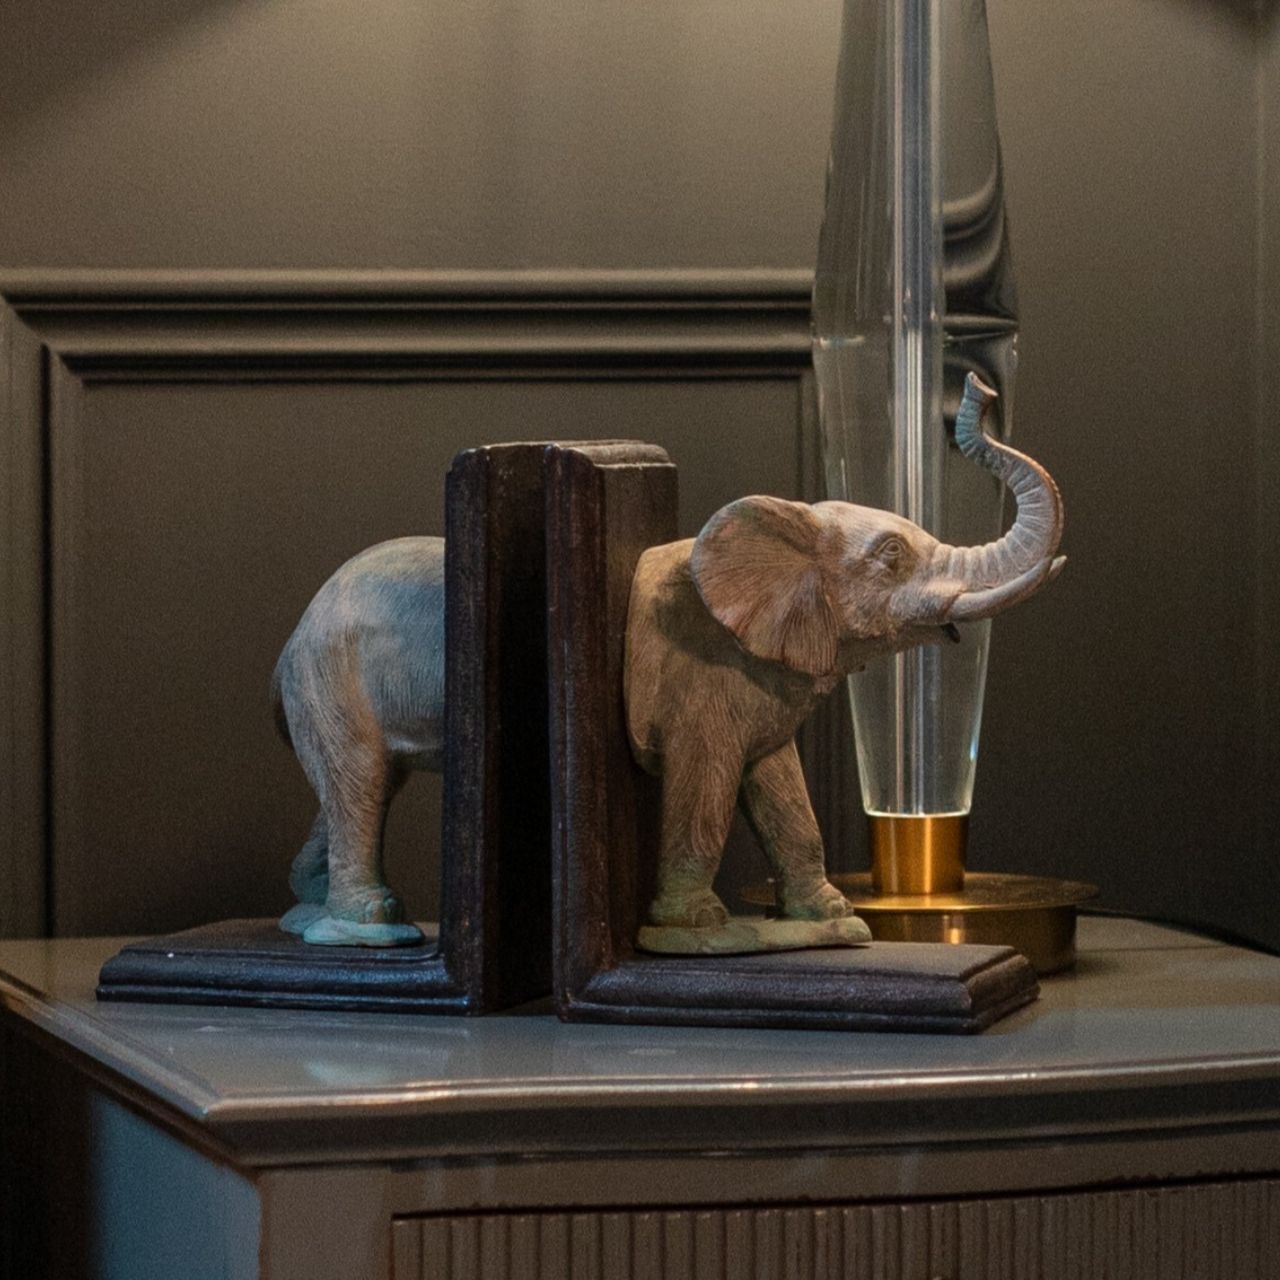 Showcase your favourite books in style and inject a sense of fun into your interiors with these Elephant book ends. The perfect addition to any room in your home.